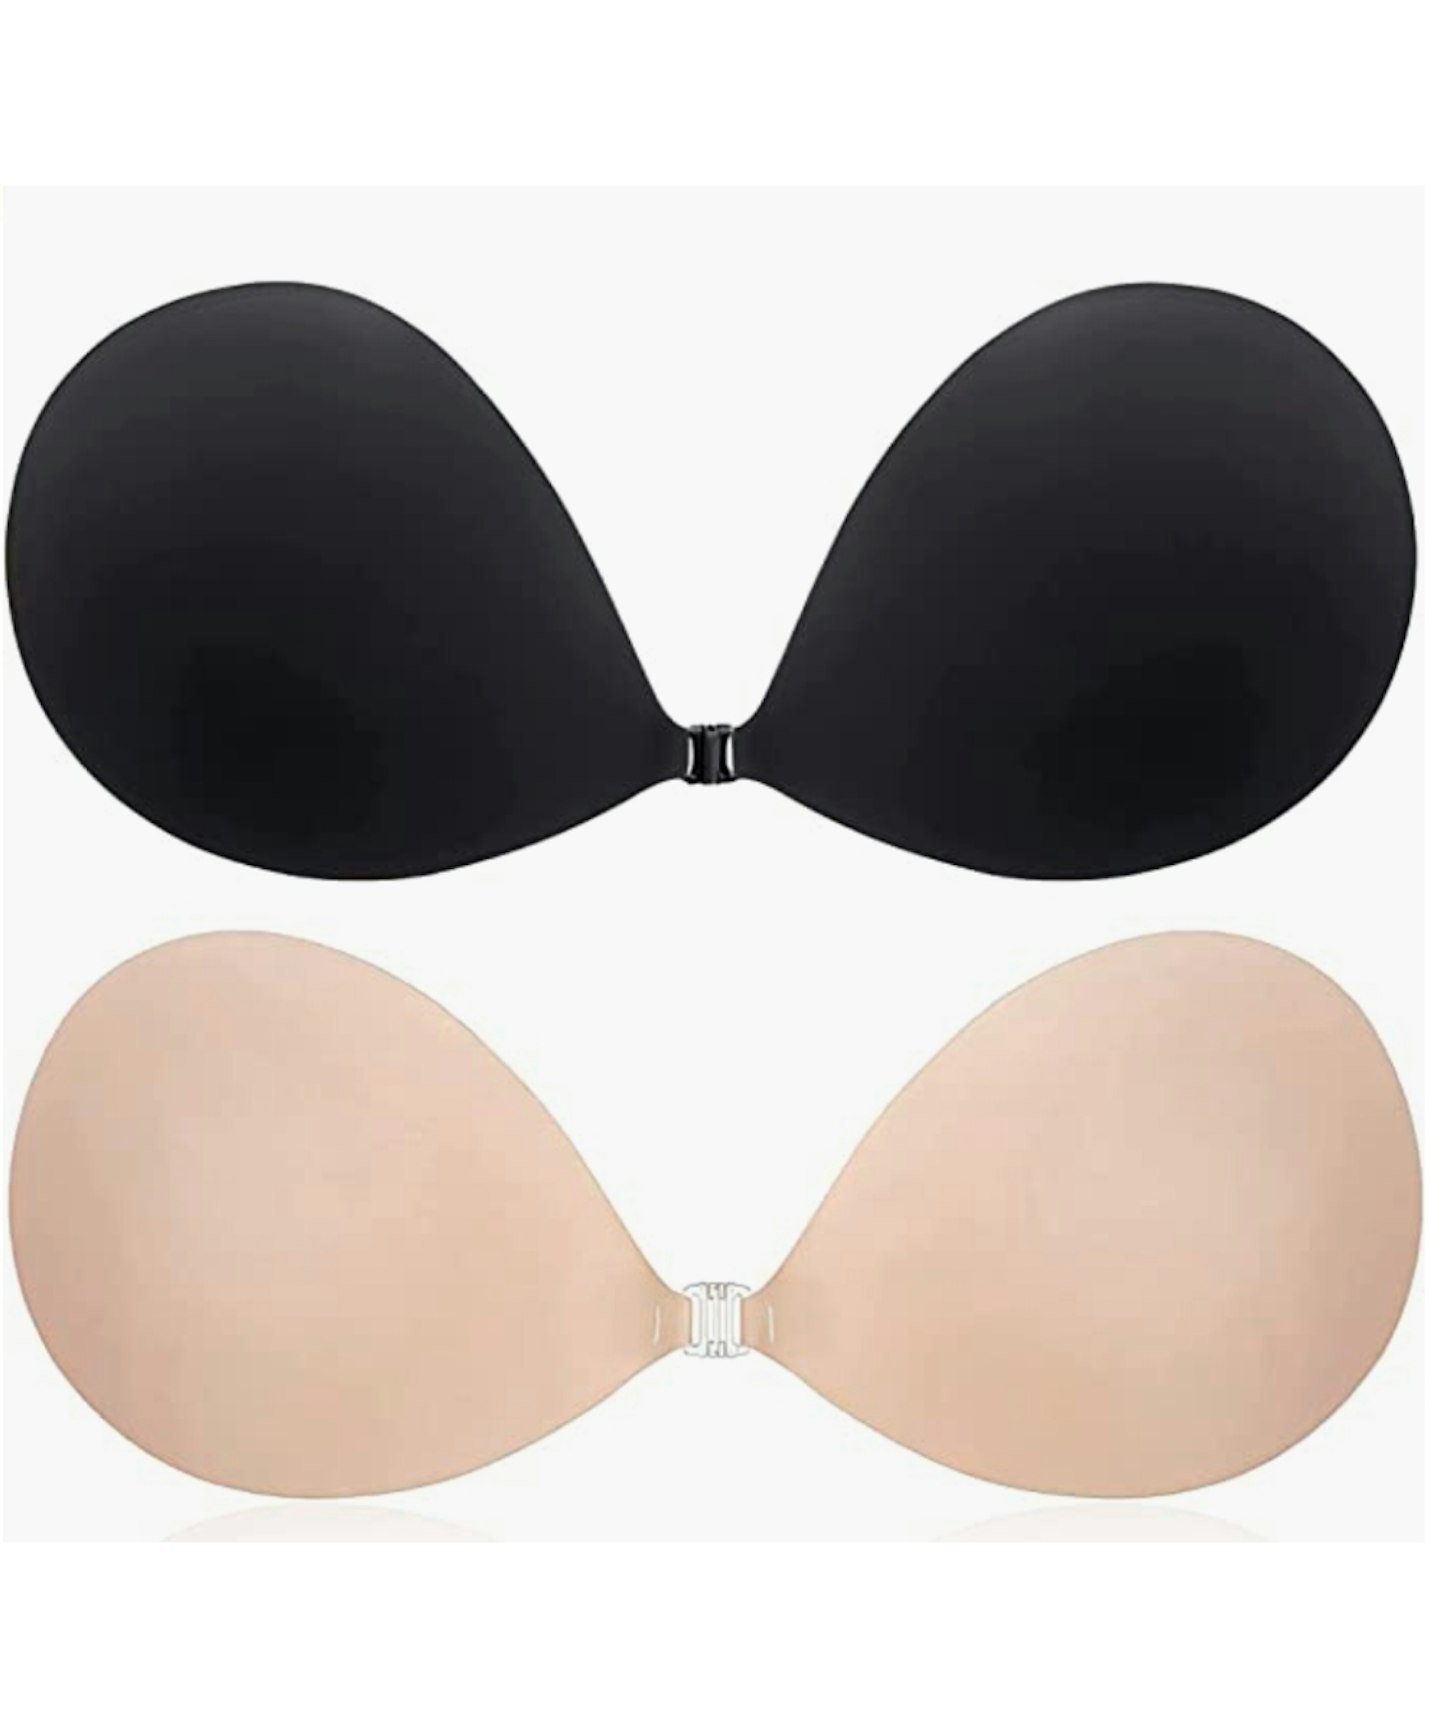 The best (and comfortable) stick-on bras you can buy online in New